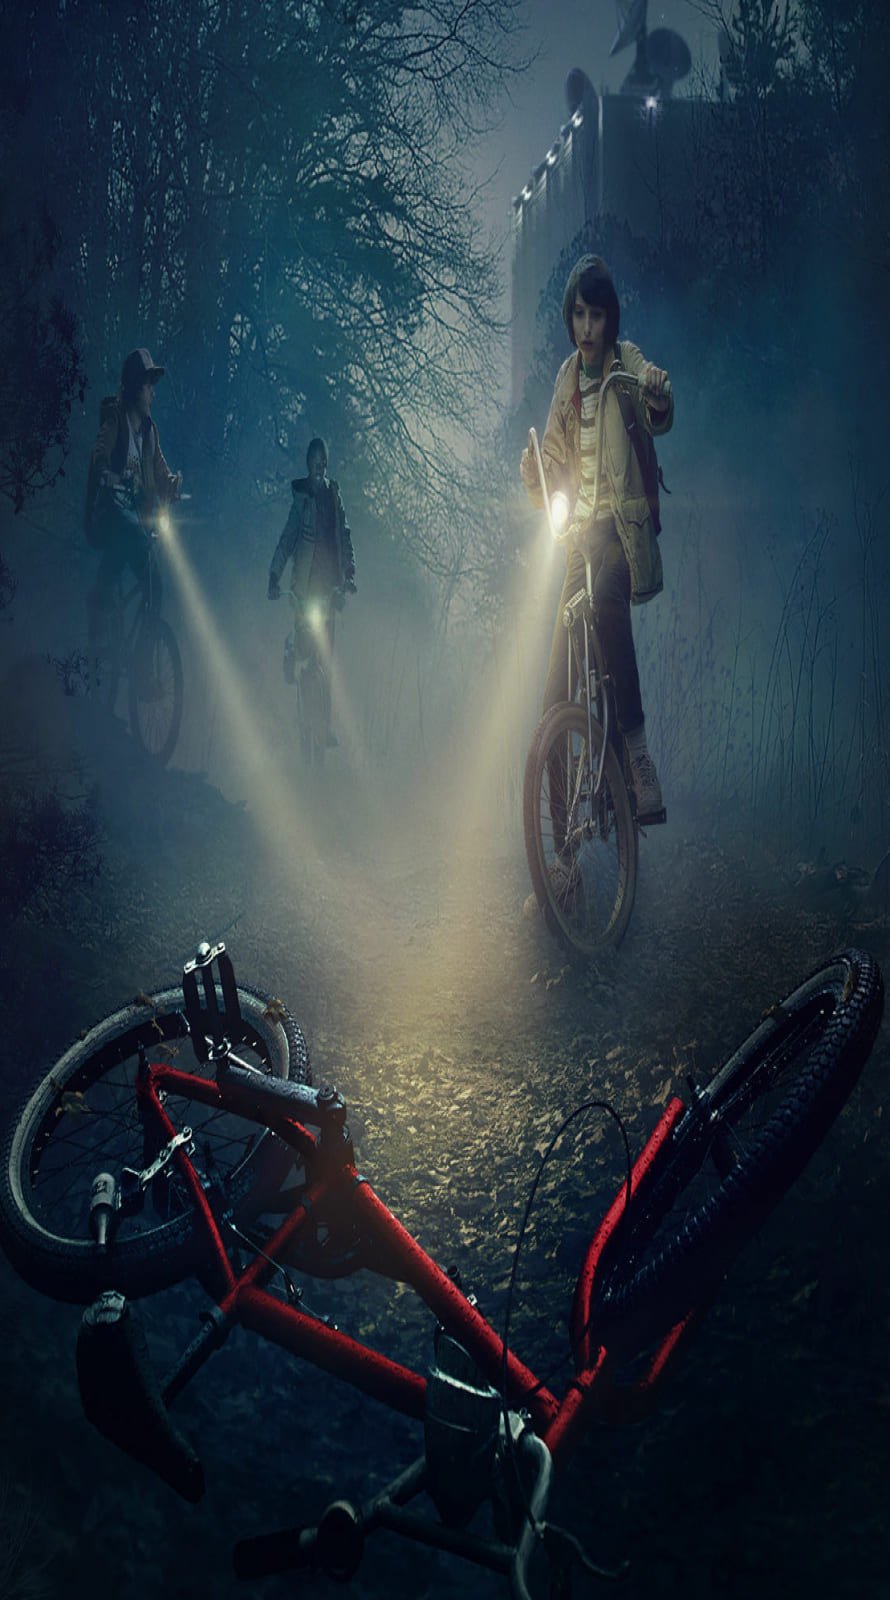 Super Cool tranger things wallpaper 4k for iPhone backgound